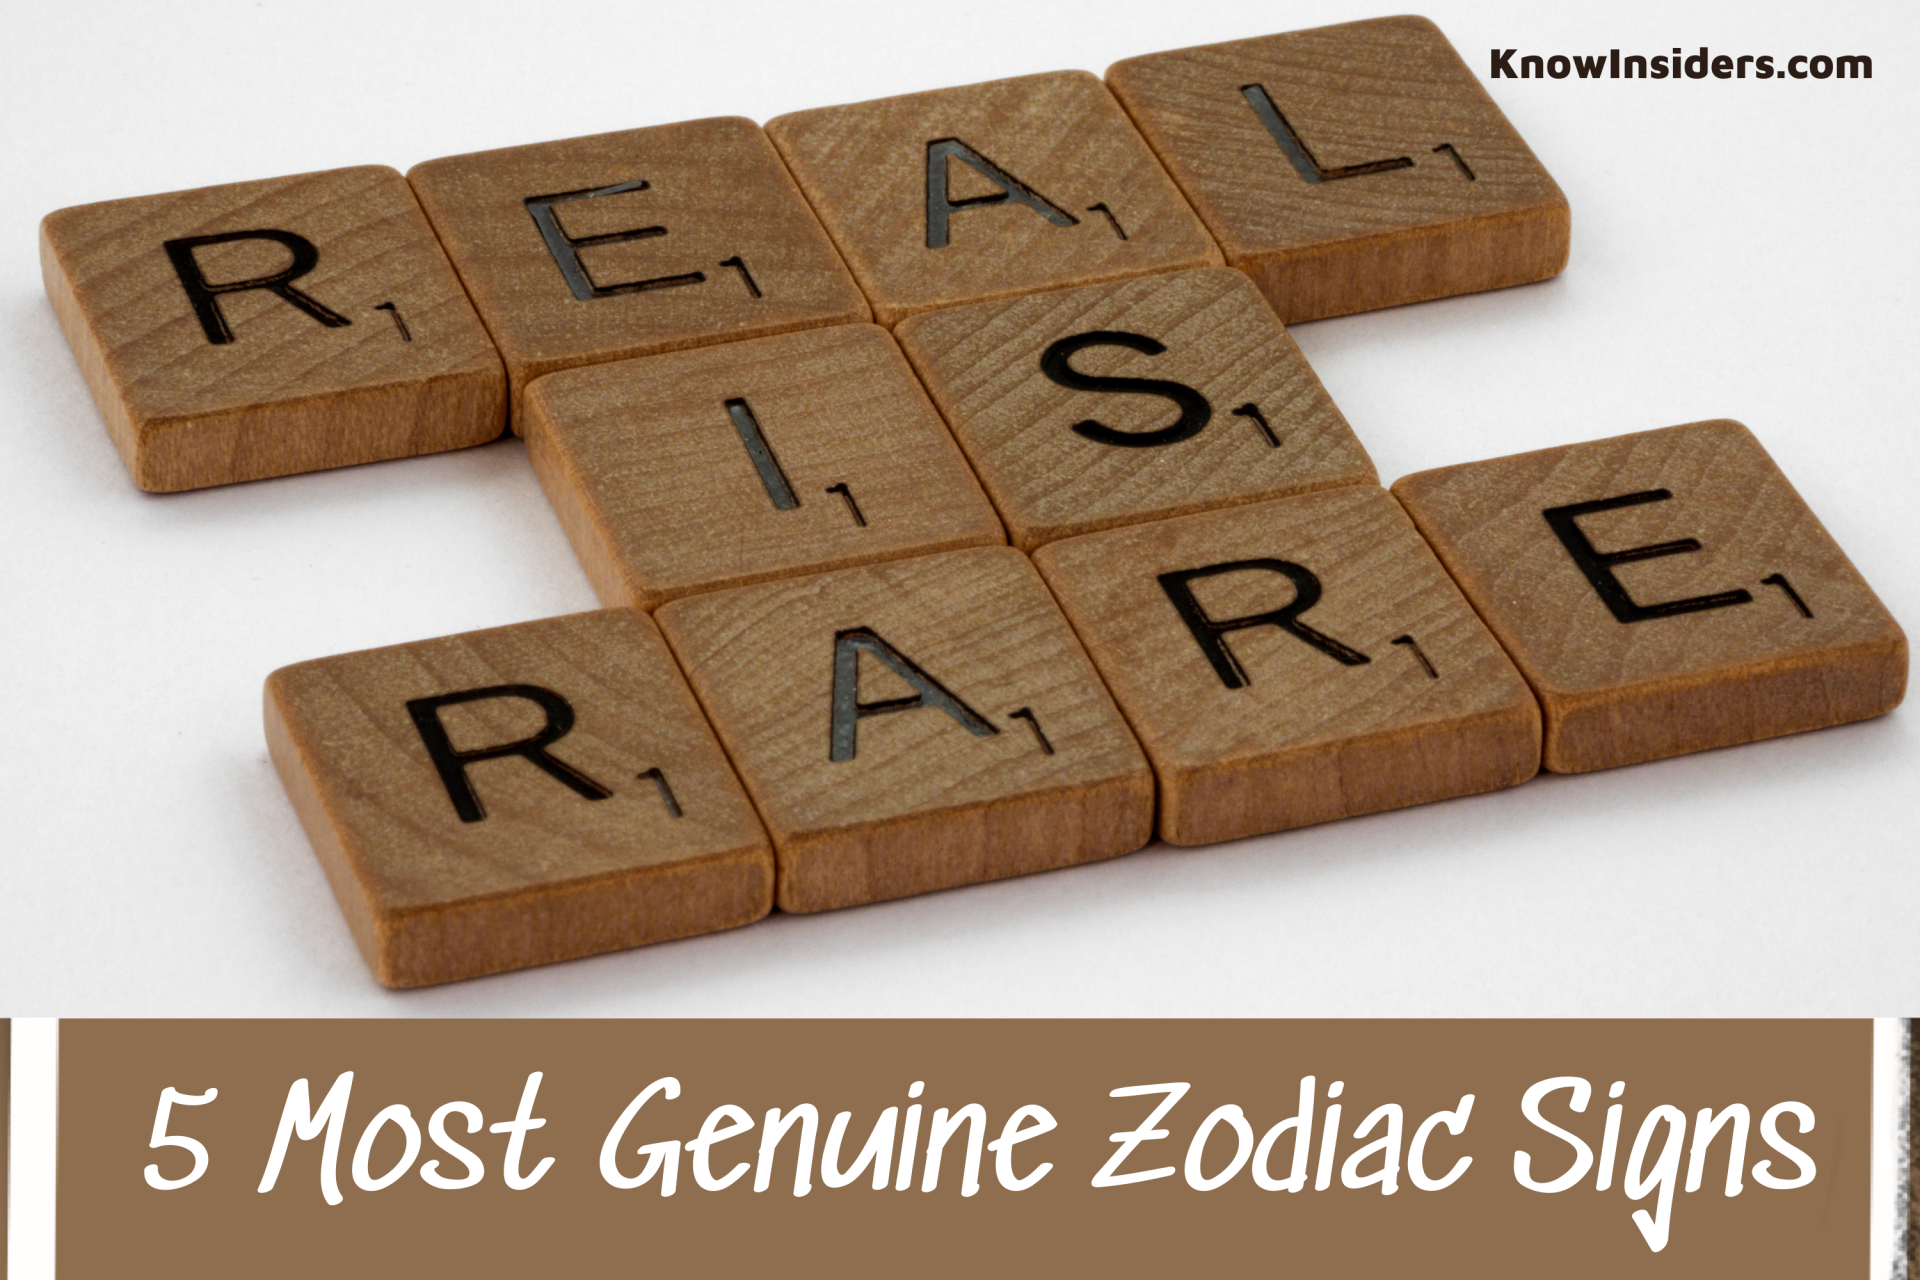 Top 5 Most Genuine Zodiac Signs, According To Astrology